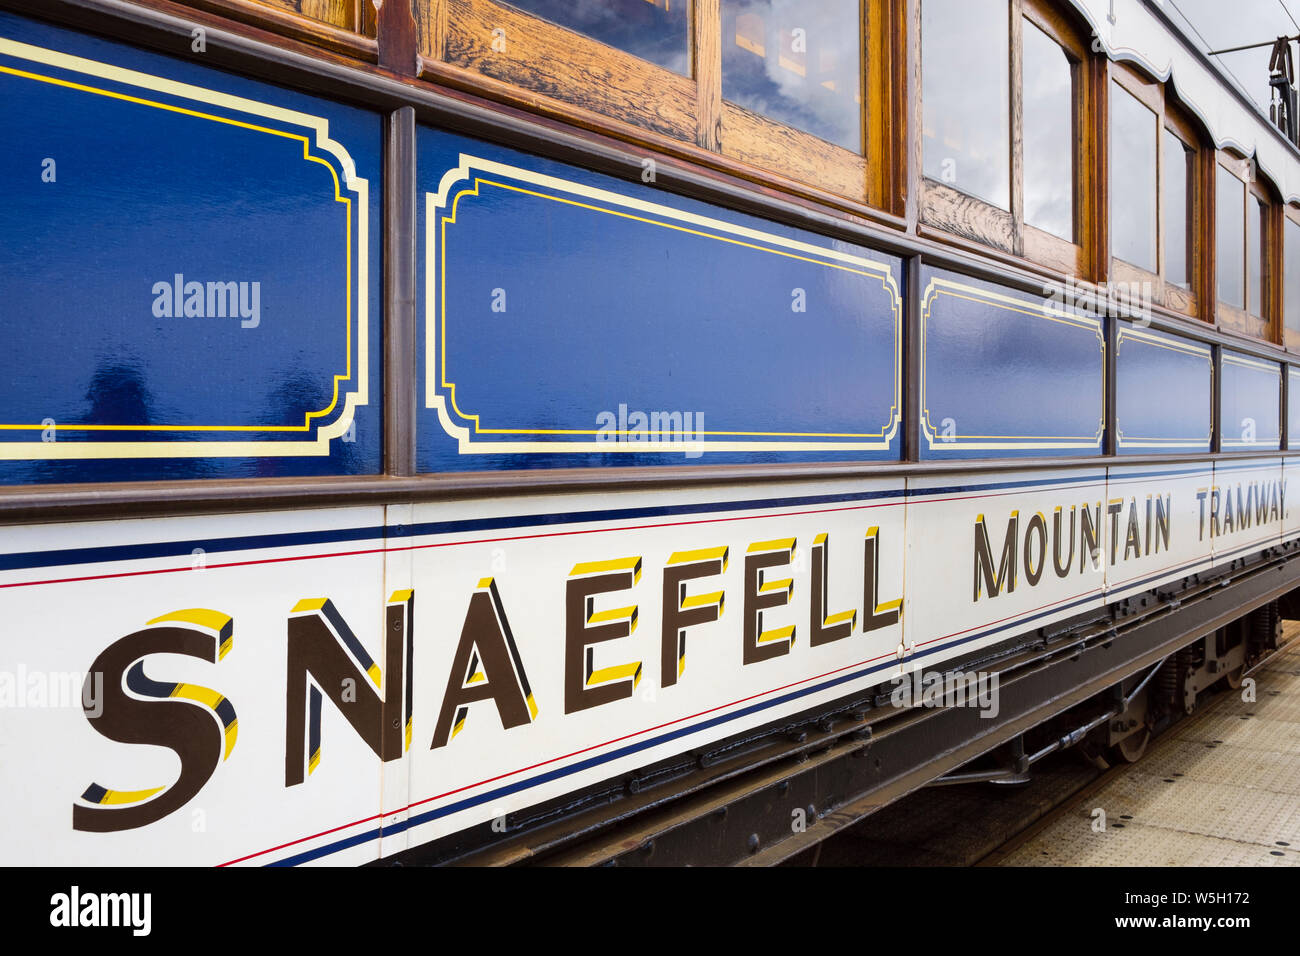 Snaefell Mountain Tramway electric railcar train number 1, built 1895. Laxey, Isle of Man, British Isles Stock Photo